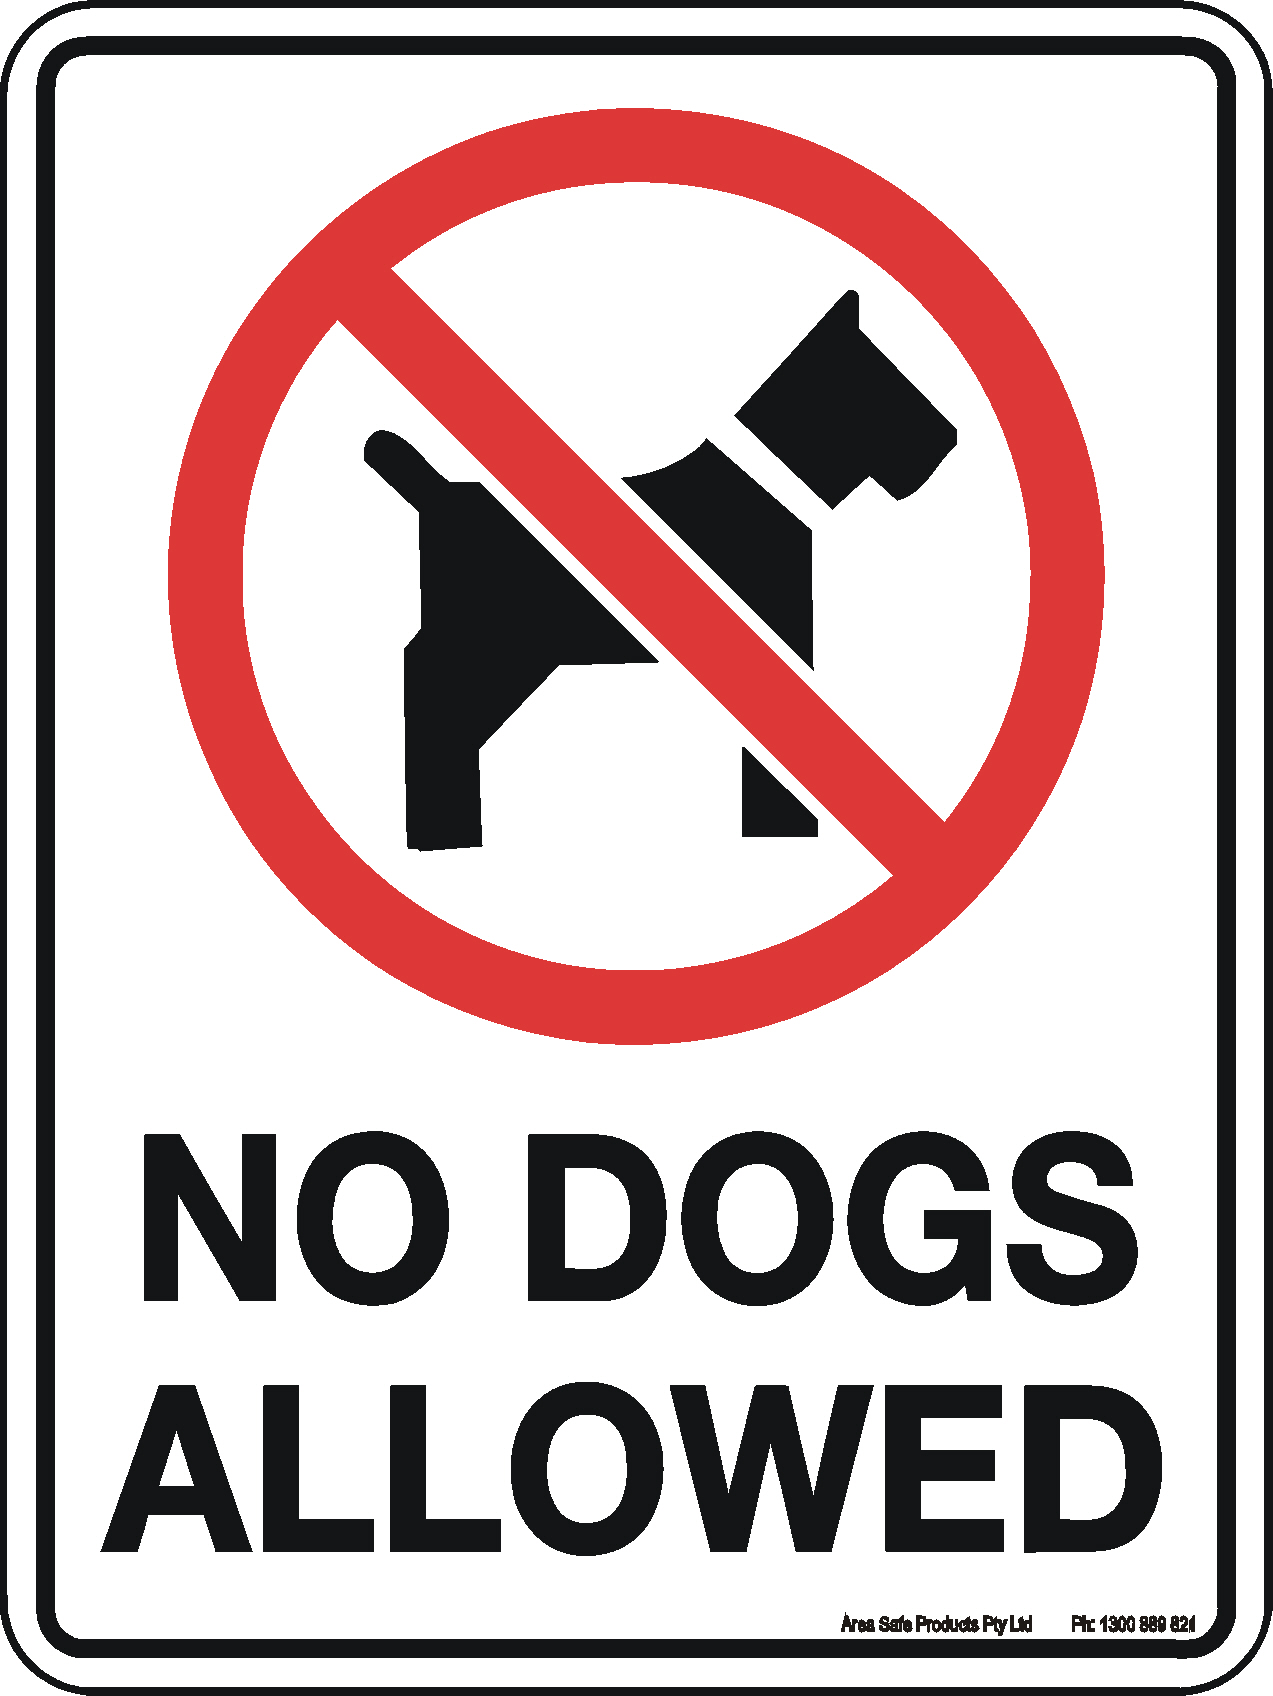 Additional property is not allowed. No Dogs allowed. No Dogs allowed sign. Знак Russians and Dogs are not allowed. Not allowed Dog.